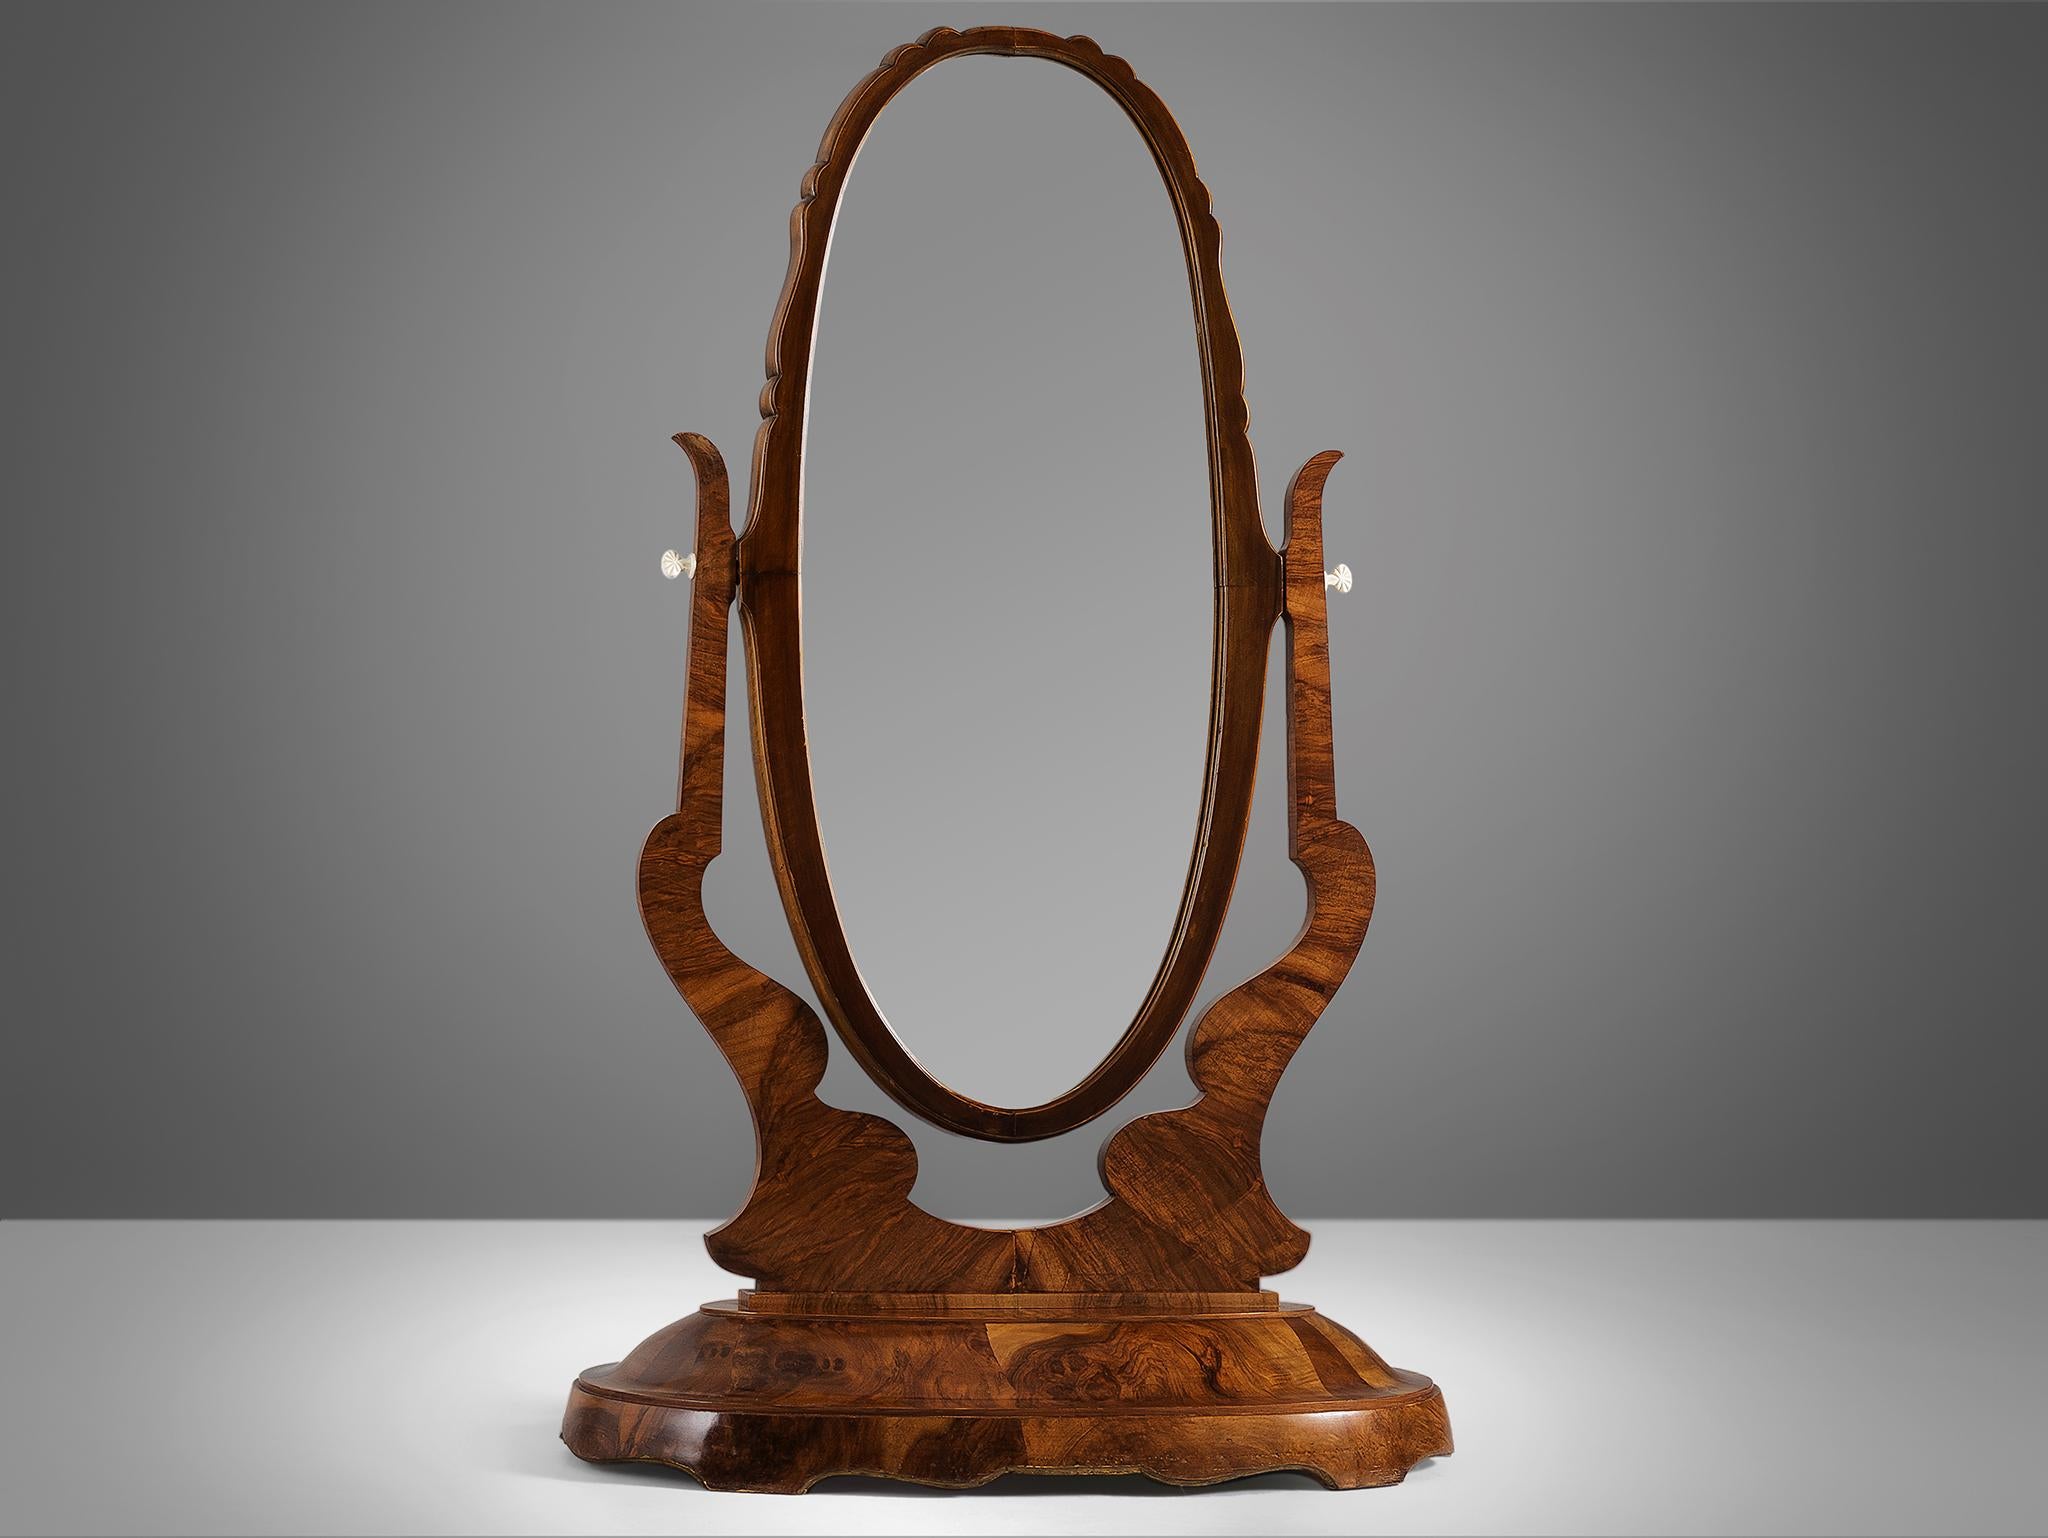 Dressing mirror, walnut burl, glass, Italy, 1940s.

Impressive and elegant dressing Italian mirror. The wood shows a wonderful grain and the walnut burl details are very beautiful and particular. The oval mirror is adjustable for easy use. The